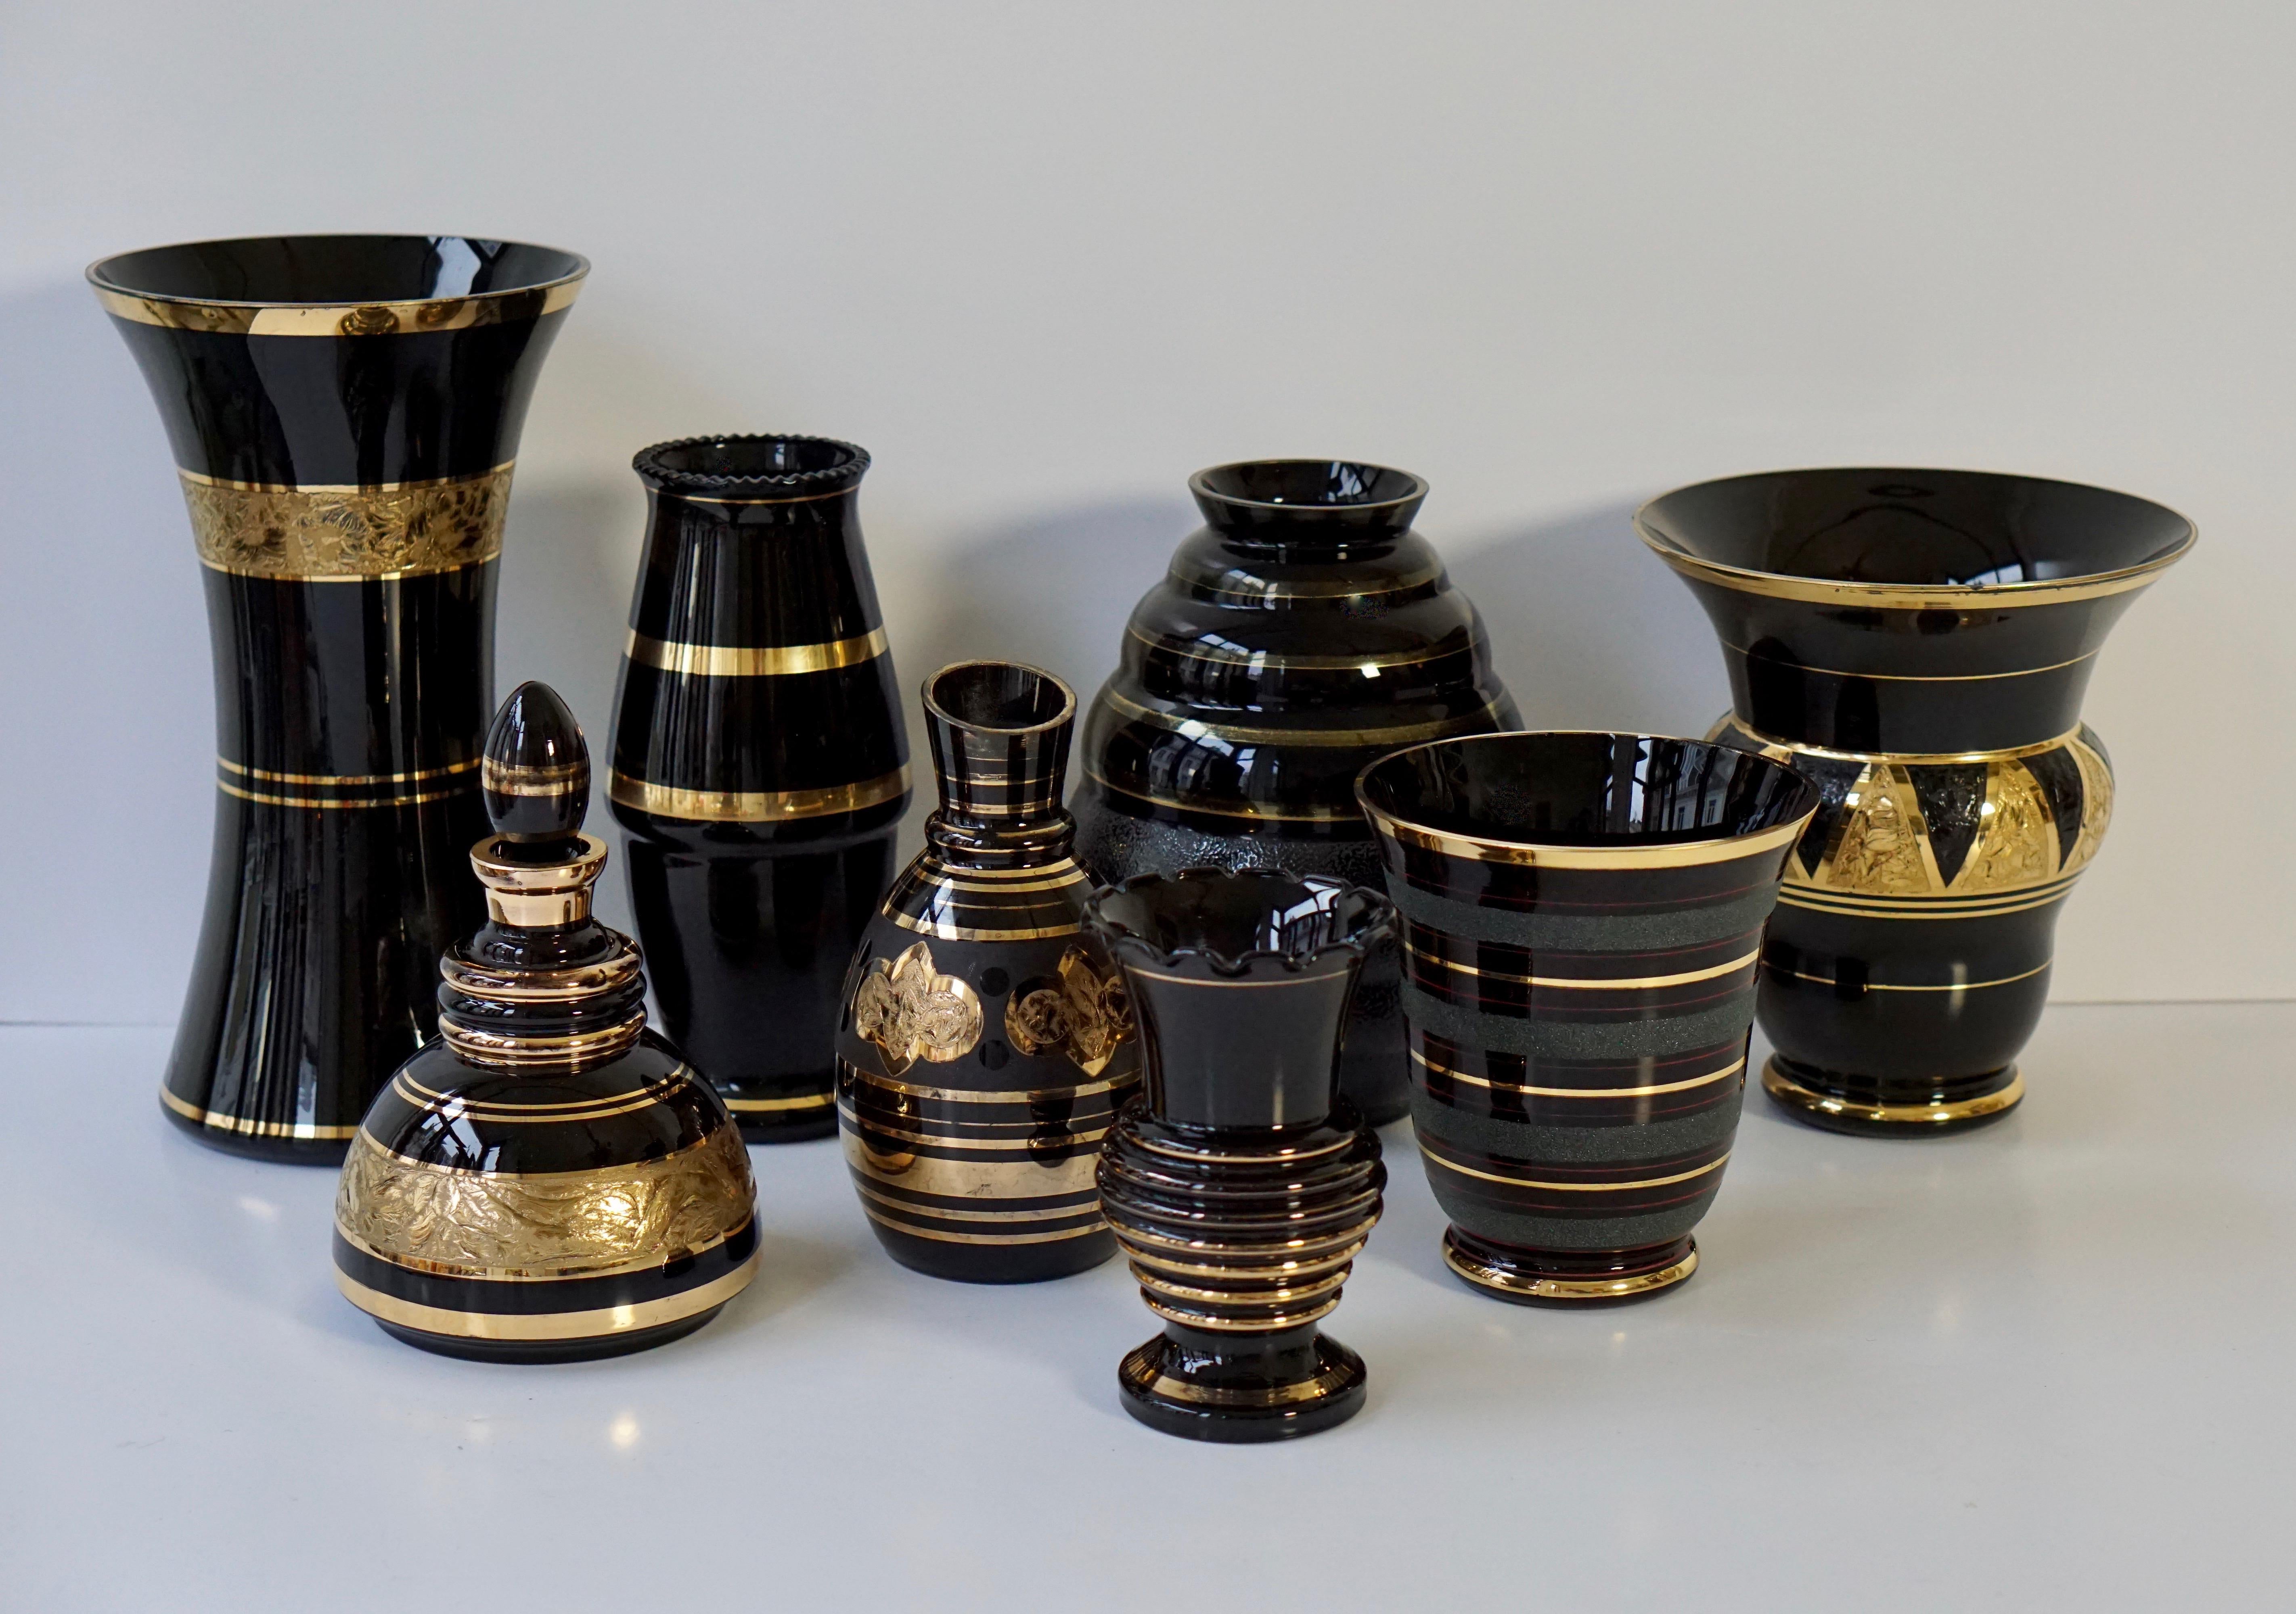 A set of seven booms glass vases and one decanter, Belgium
Measures: Height; 29,23,22,20,20,19,16,15 cm.
Diameter; 16, 10, 16 ,19, 12,10,14,9 cm.